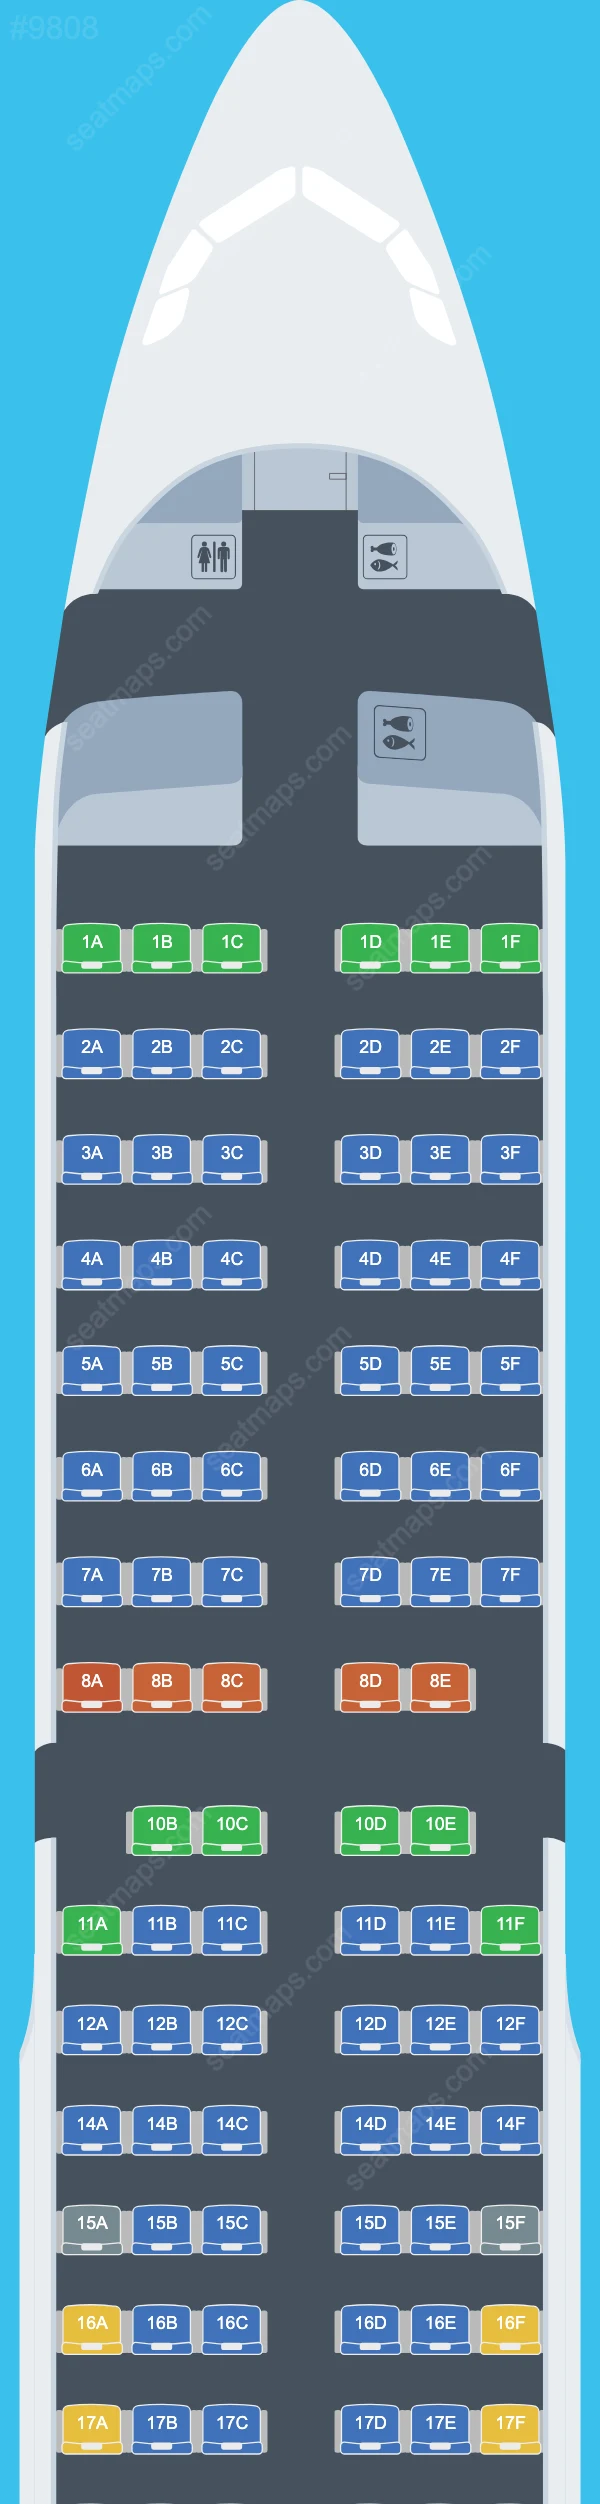 Olympic Air Airbus A321-200 seatmap preview